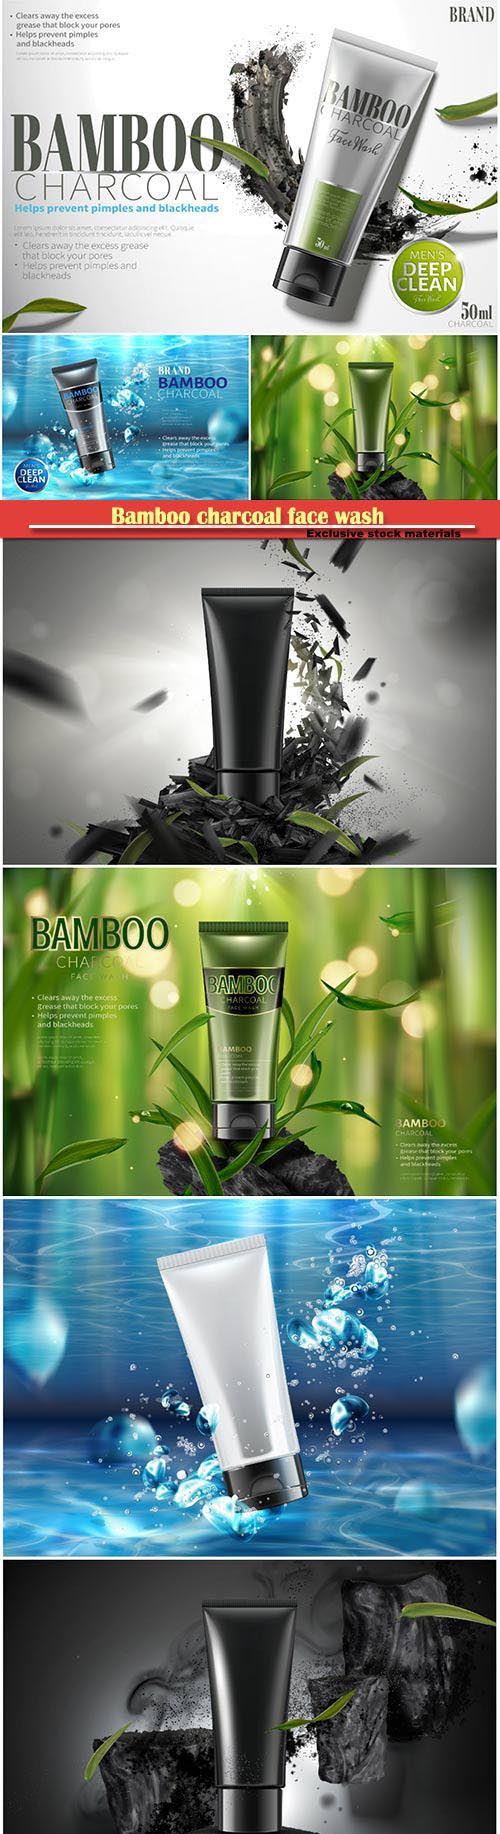 Bamboo charcoal face wash in 3d vector illustration